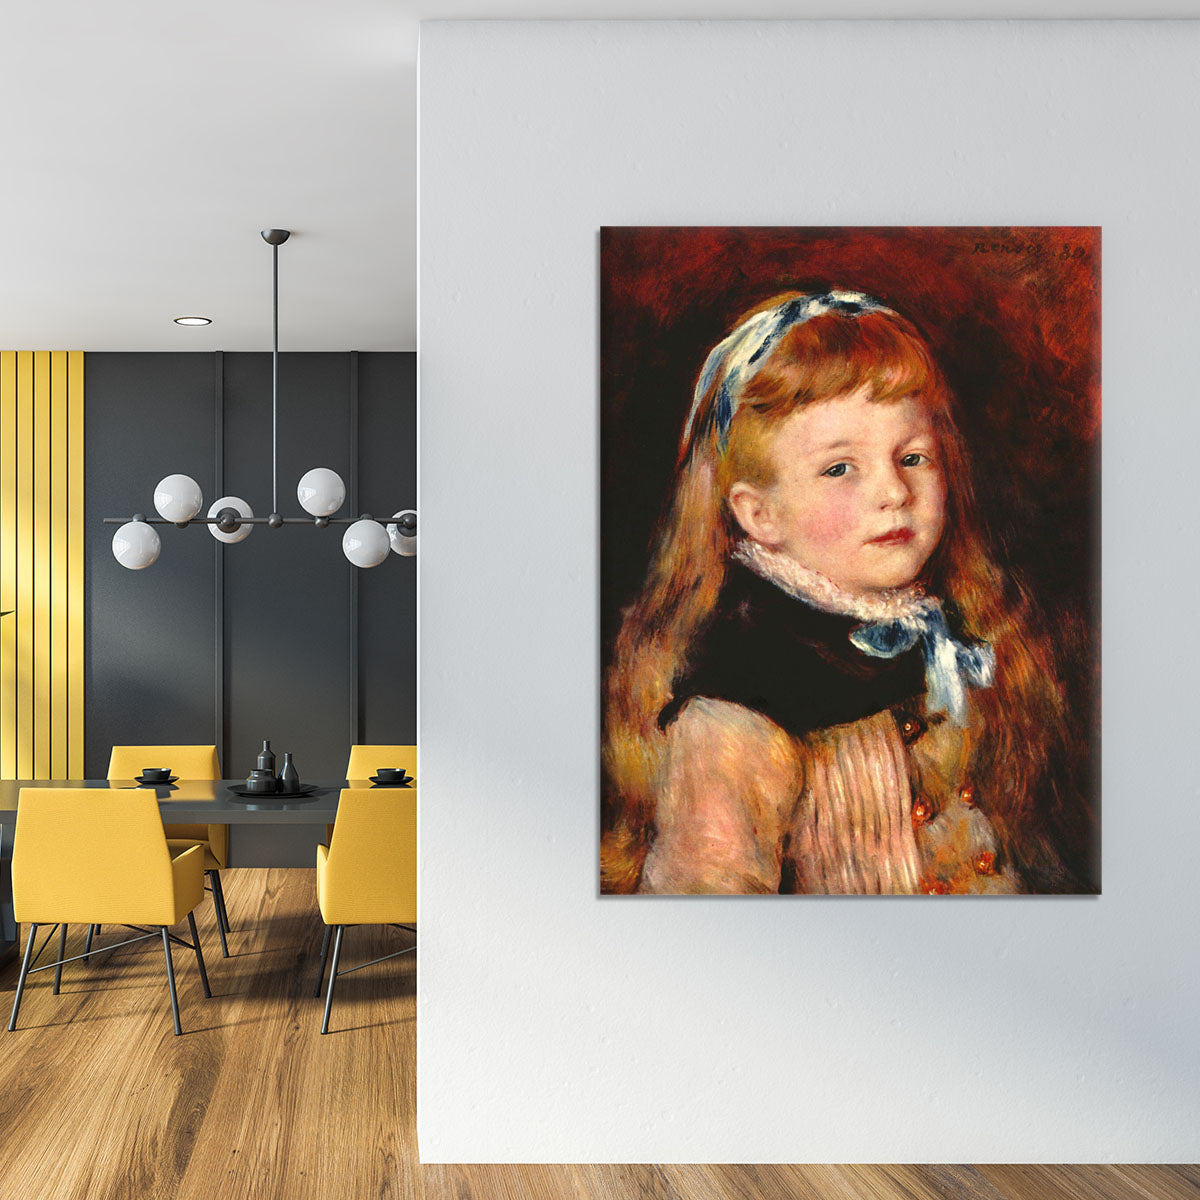 Mademoiselle Grimprel with blue hair band by Renoir Canvas Print or Poster - Canvas Art Rocks - 4